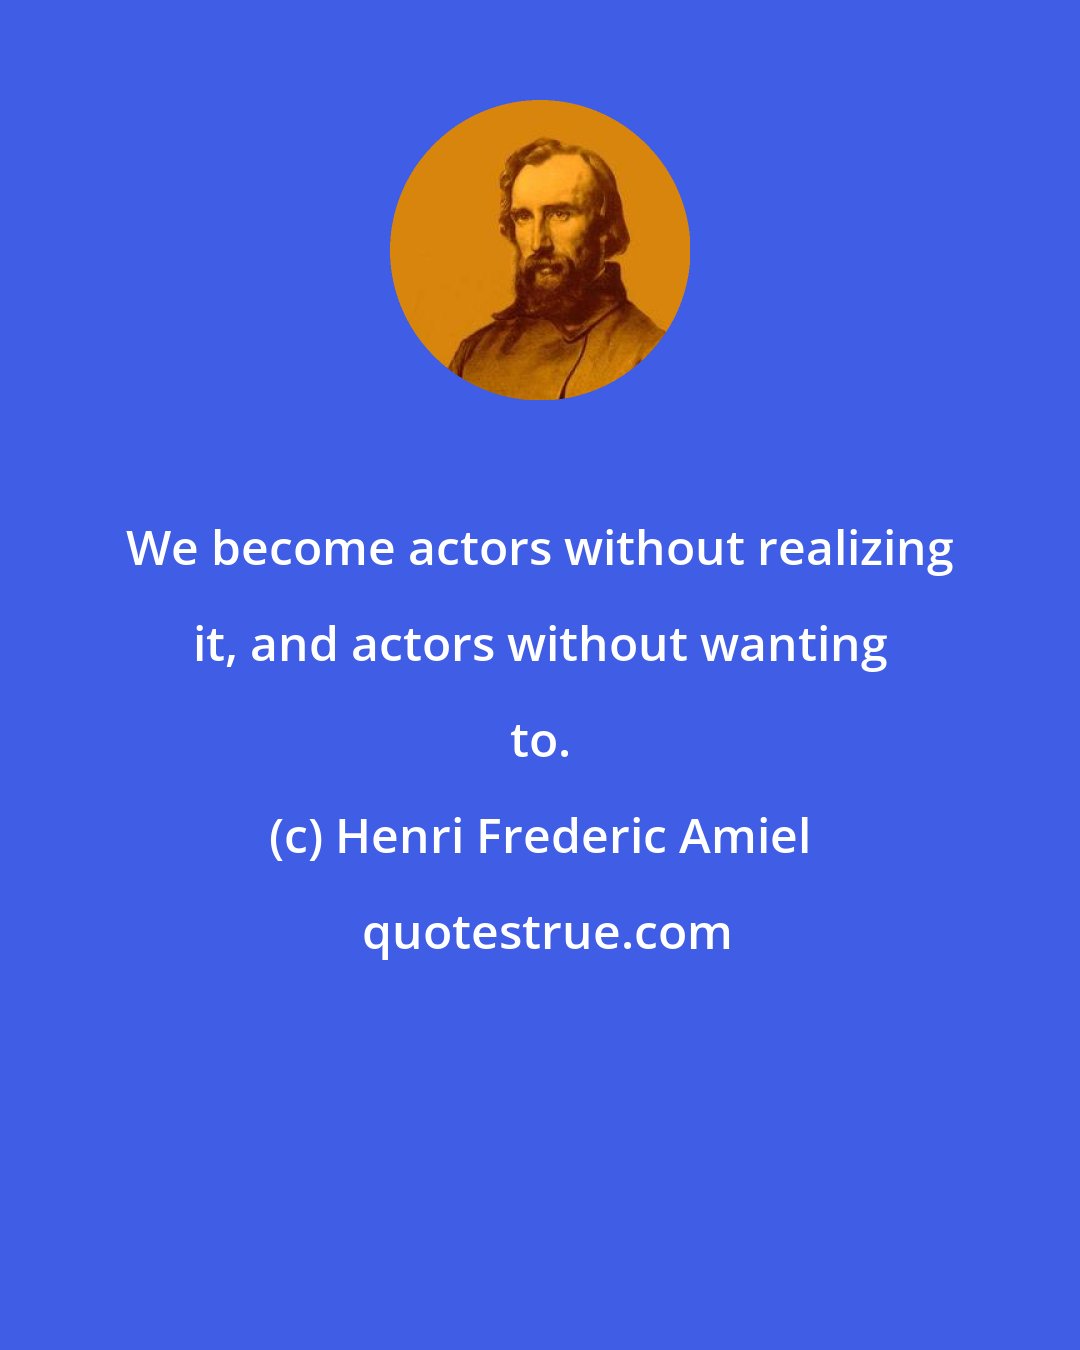 Henri Frederic Amiel: We become actors without realizing it, and actors without wanting to.